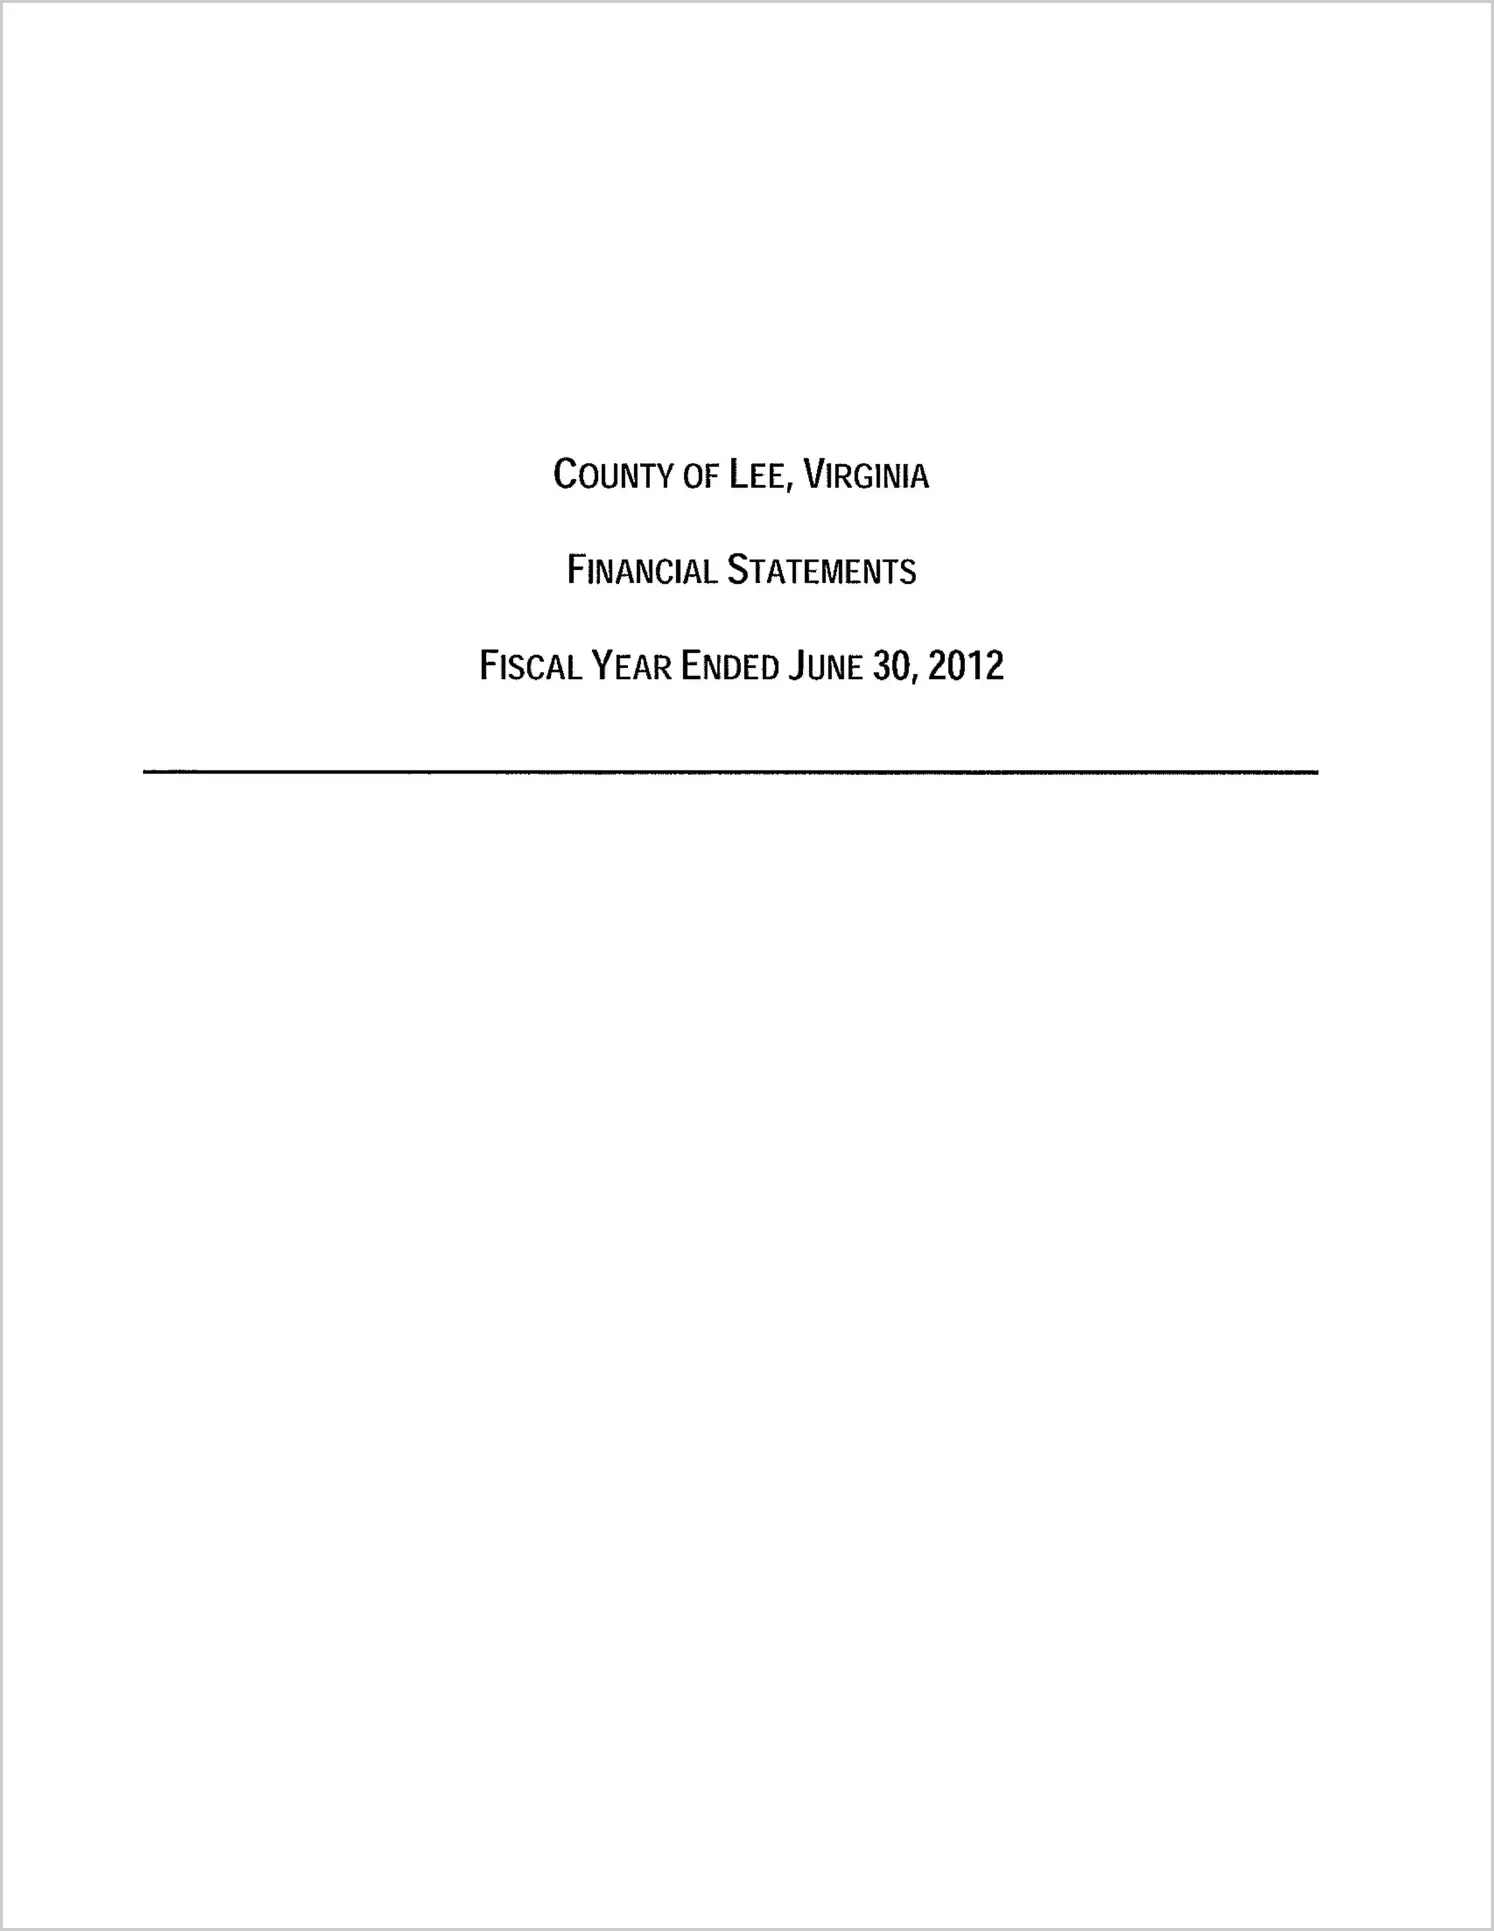 2012 Annual Financial Report for County of Lee